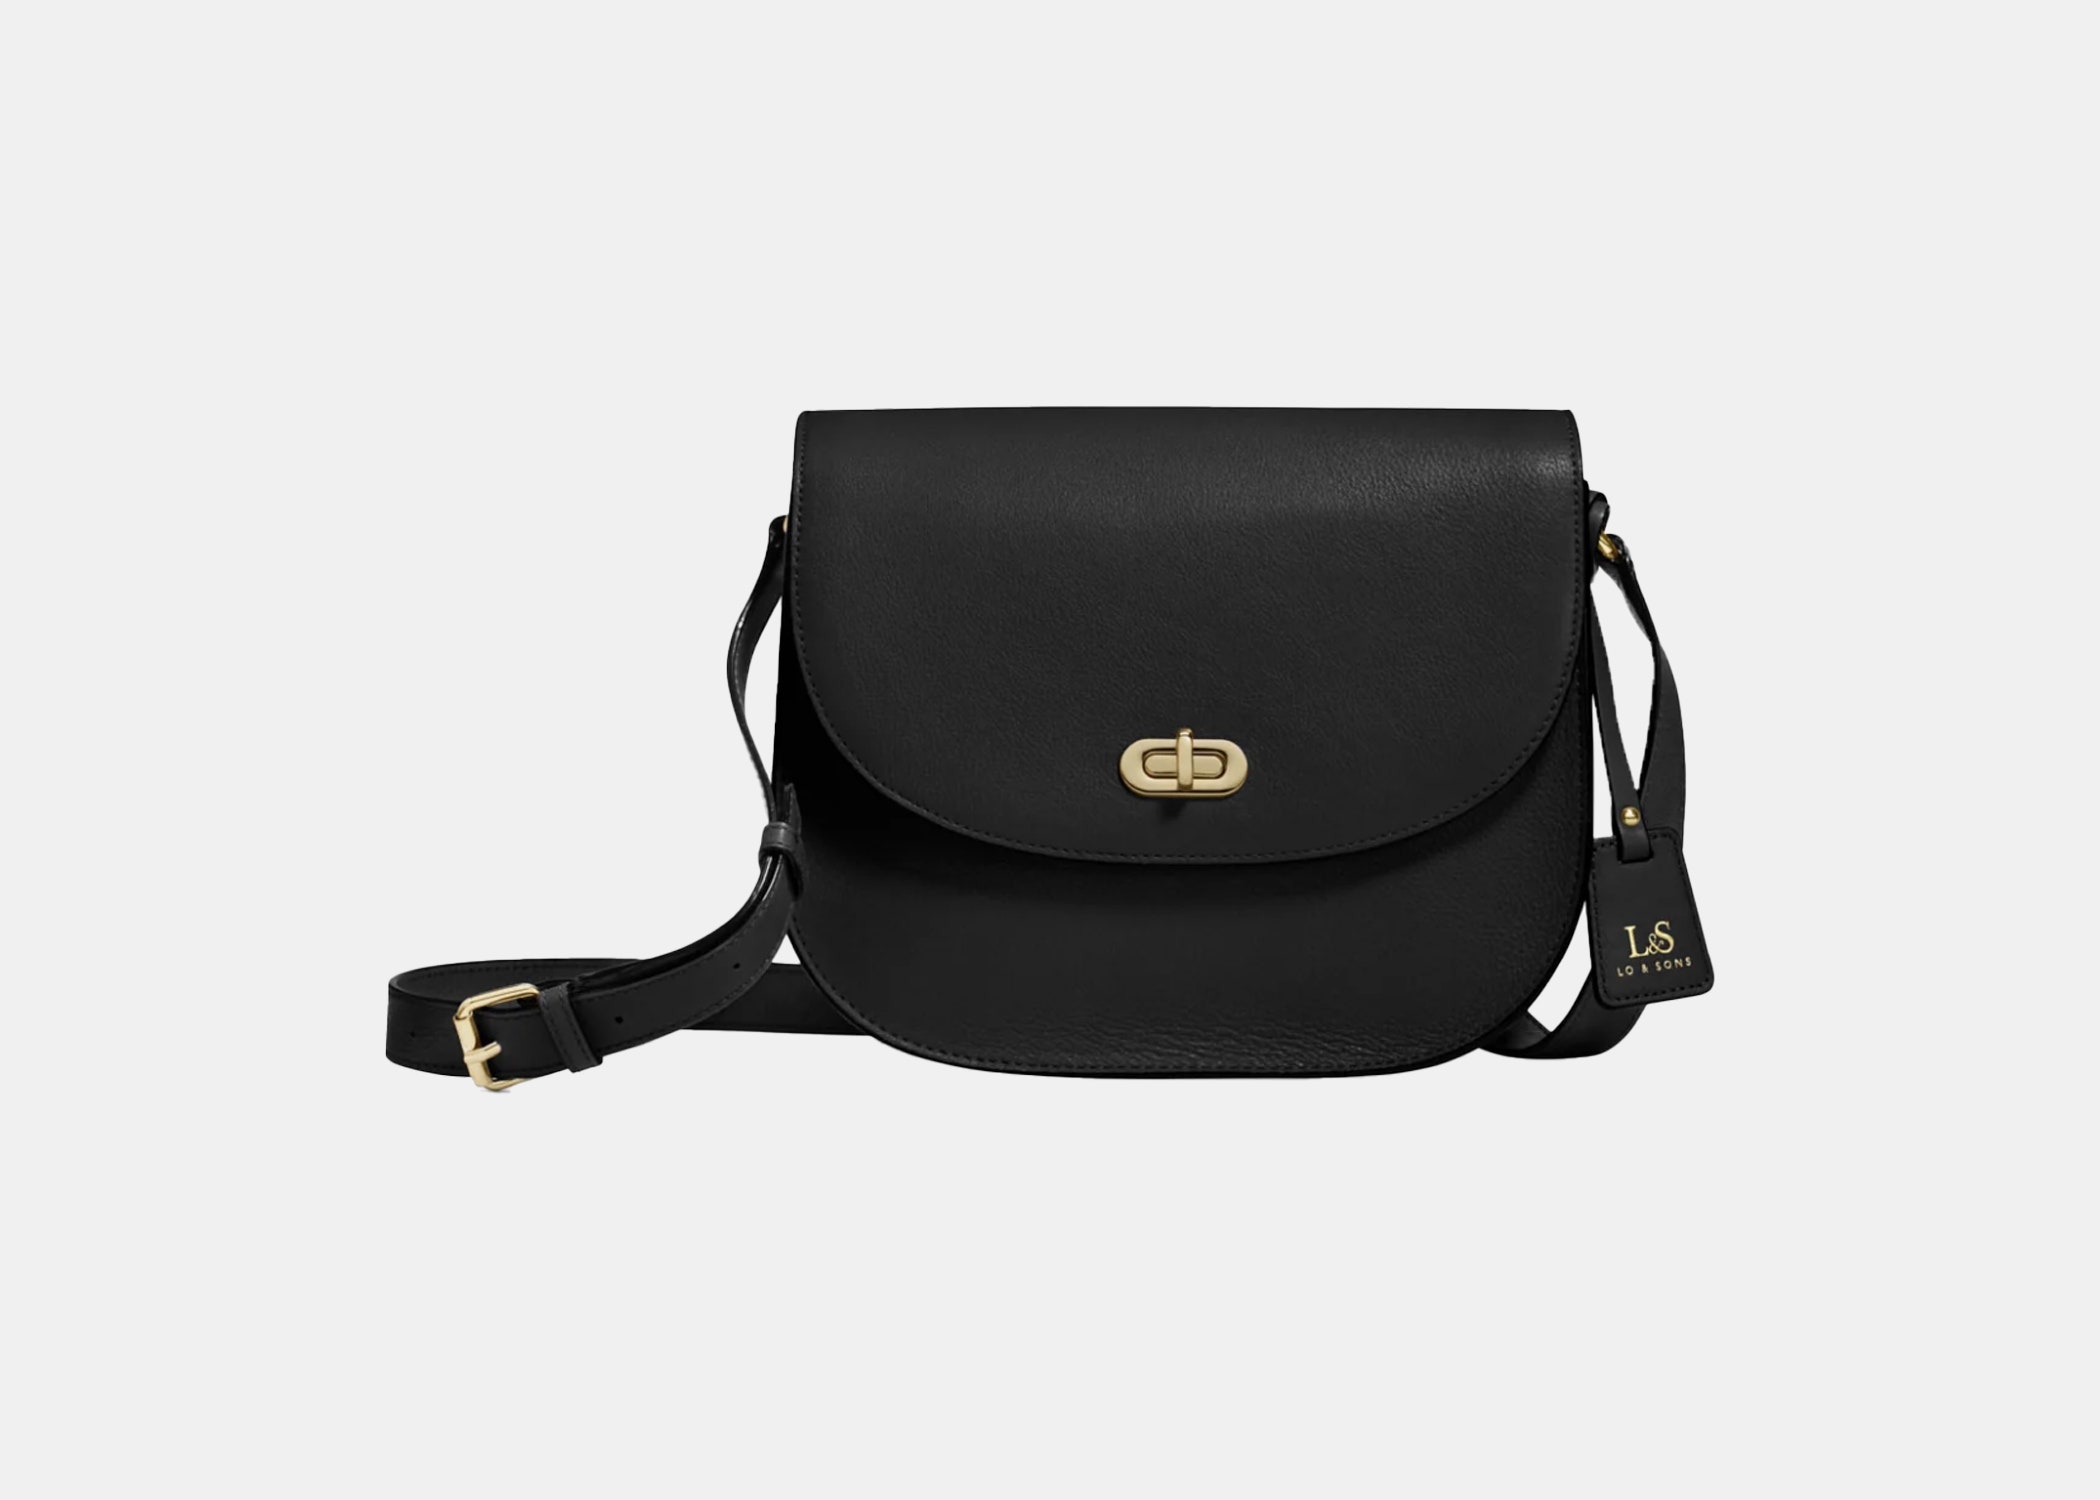 <p><strong>Best overall style</strong></p> <p>This sleek, luxurious bag from Lo & Sons is simple and beautiful, with rich, colorful full-grain leather and gold hardware. It’s a crossbody style that to the untrained eye looks like a standard purse, not a bulky camera case. Best of all, it’s specifically designed to transport and protect a DSLR camera, and even has space to throw in a small lens or external flash. Inside, padded foam compartments snugly fit the equipment, and there are also slim pockets designed to hold memory cards, as well as your keys and credit cards.</p> <p><strong>Noteworthy features:</strong> Quilted interior, turnlock clasp for security</p> $368, Lo & Sons. <a href="https://www.loandsons.com/products/claremont-full-grain-leather-black">Get it now!</a><p>Sign up to receive the latest news, expert tips, and inspiration on all things travel</p><a href="https://www.cntraveler.com/newsletter/the-daily?sourceCode=msnsend">Inspire Me</a>